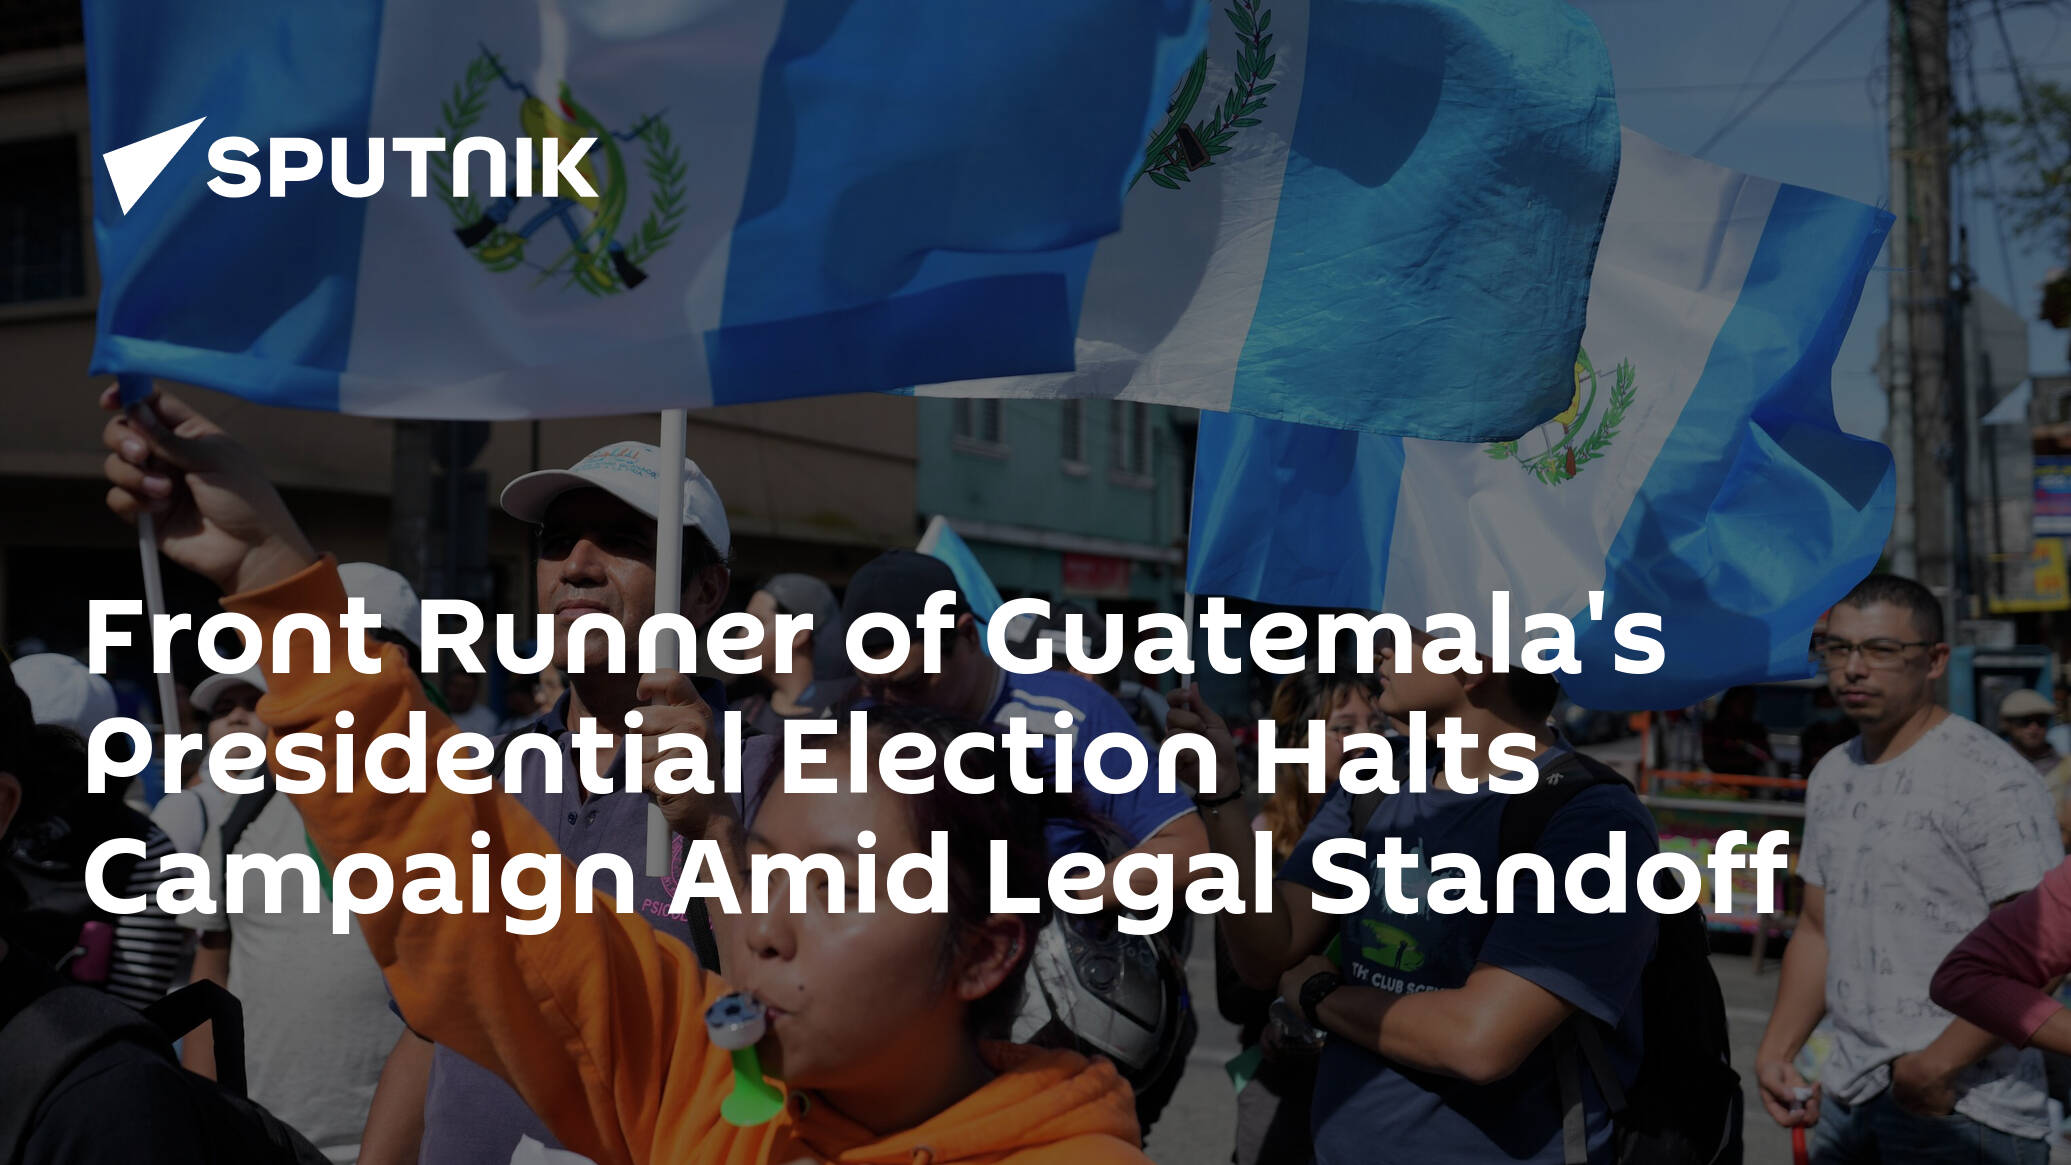 Front Runner of Guatemala's Presidential Election Halts Campaign Amid Legal Standoff